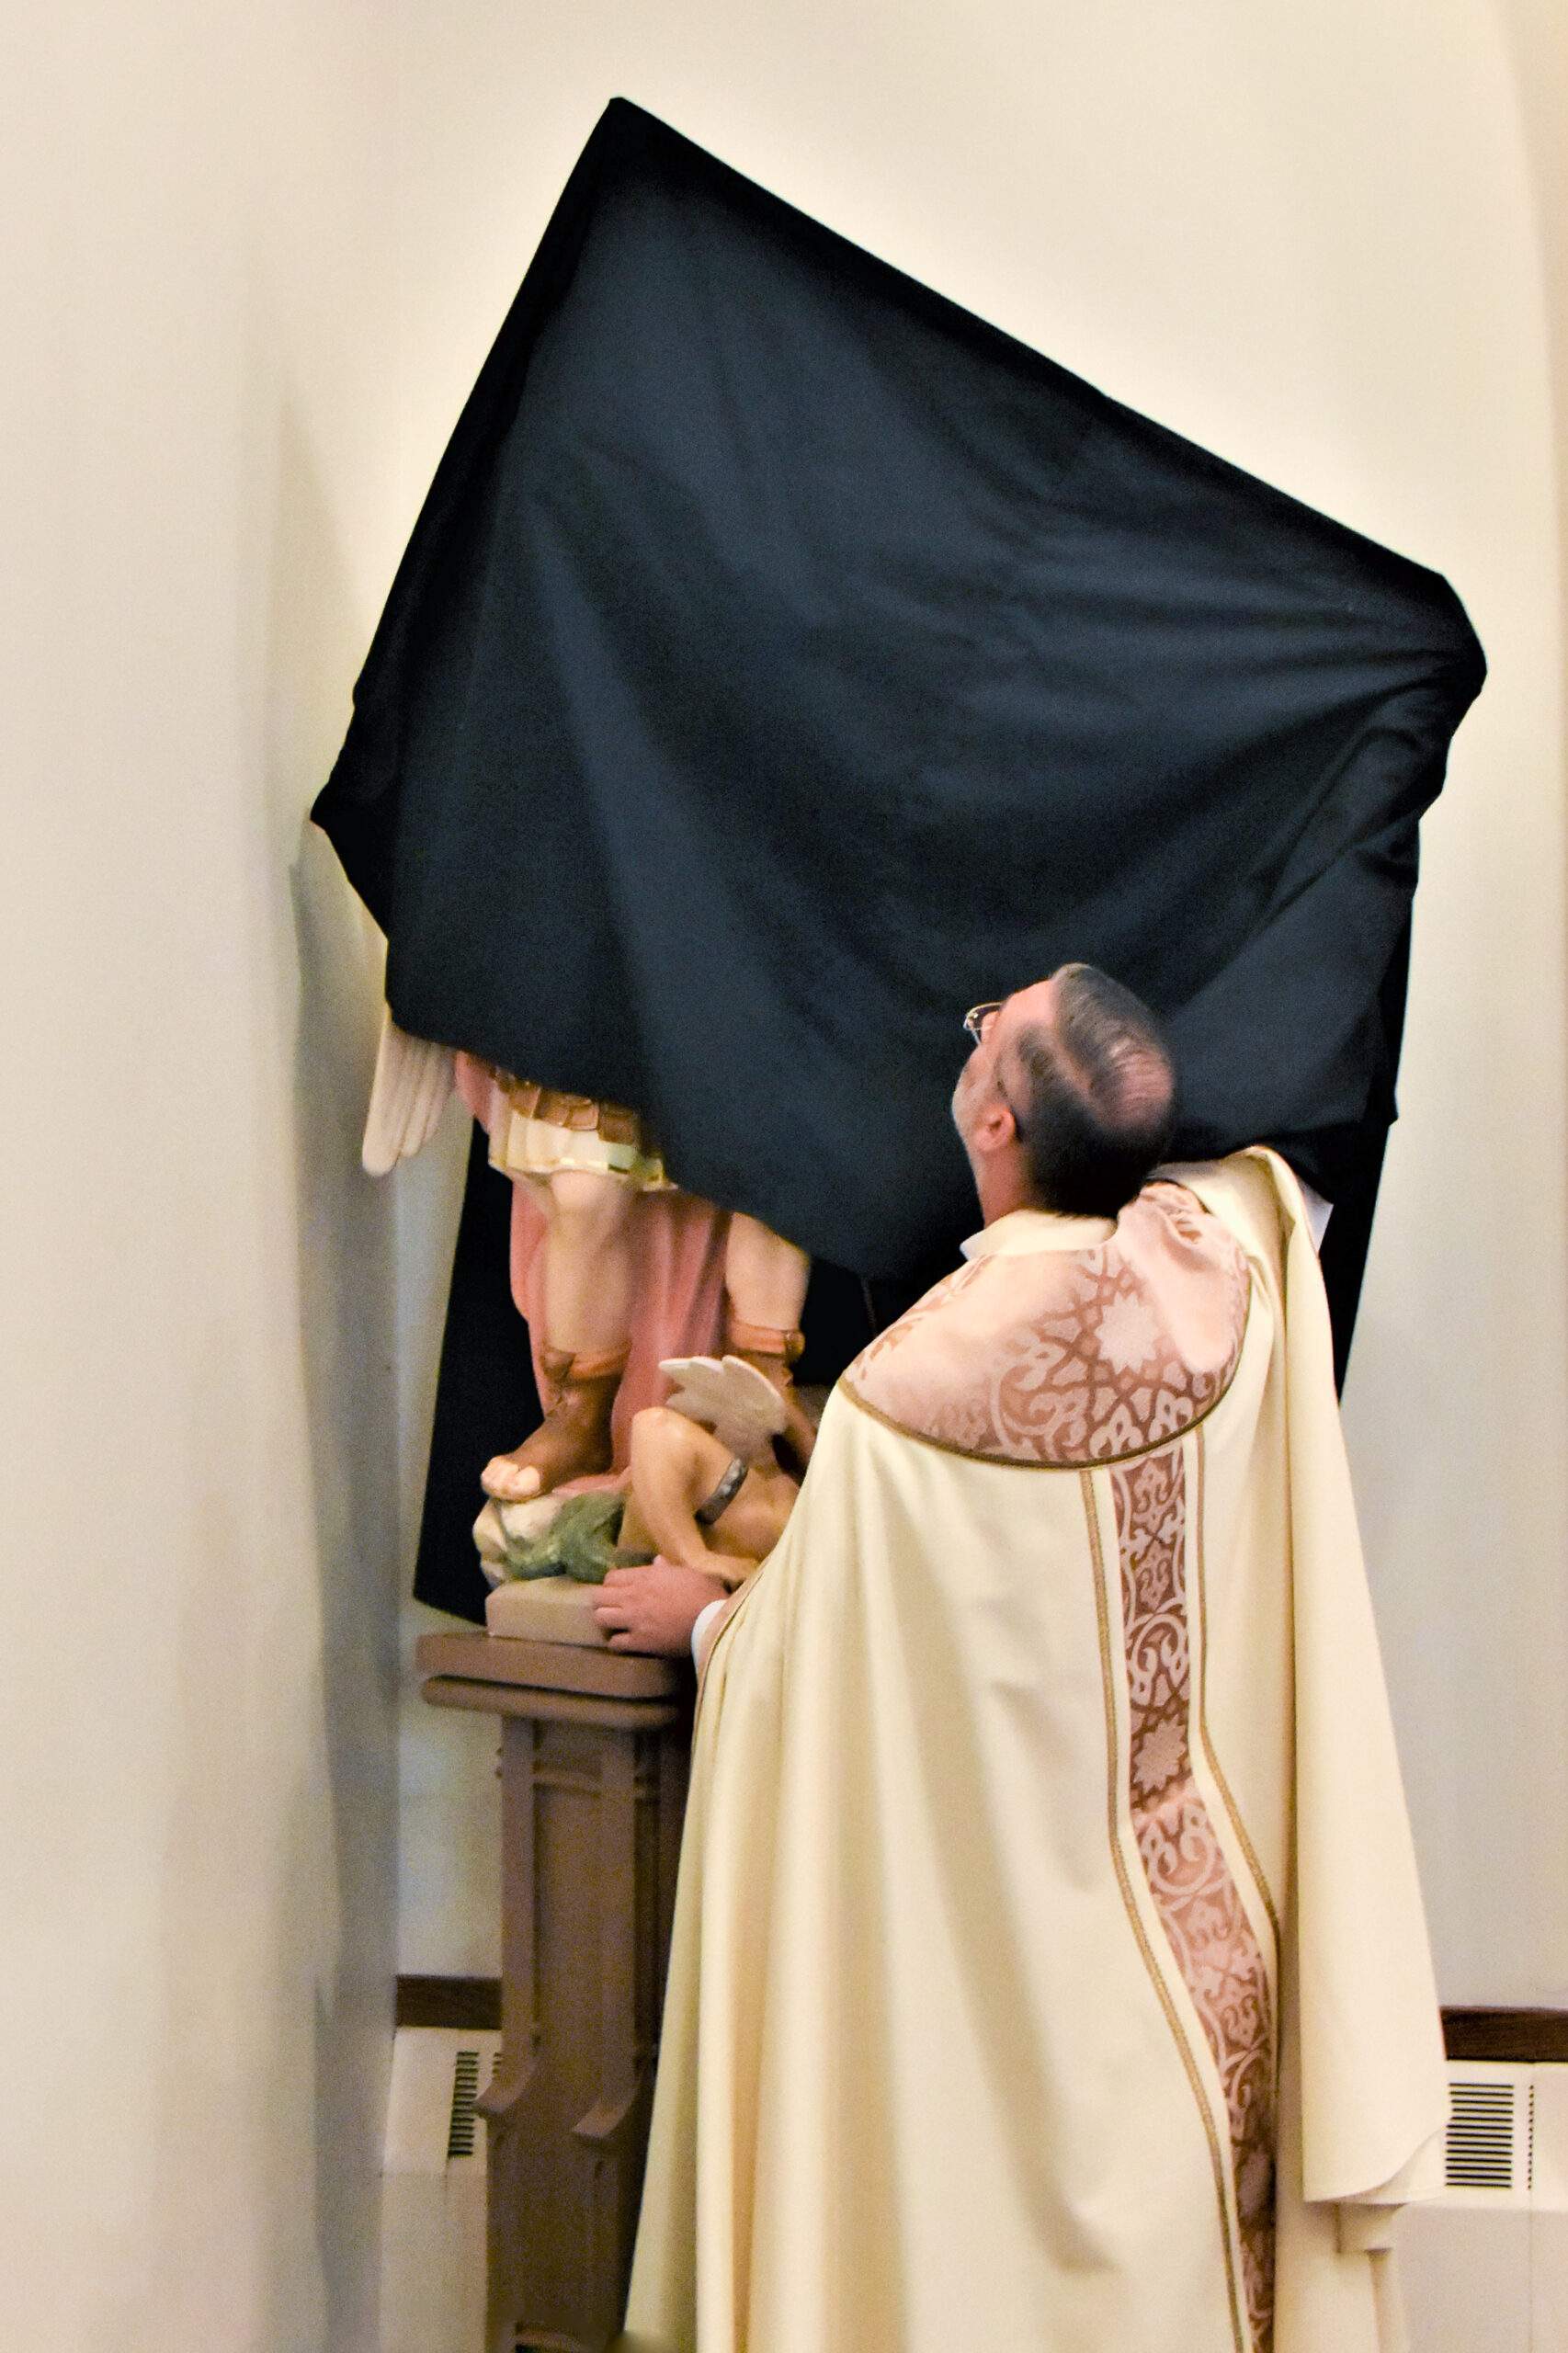 Father Conoby unveils the St. Michael Statue from St. Michael Church in Windham (closed in 2022) at its new home at St. Ambrose Parish in Garrettsville.